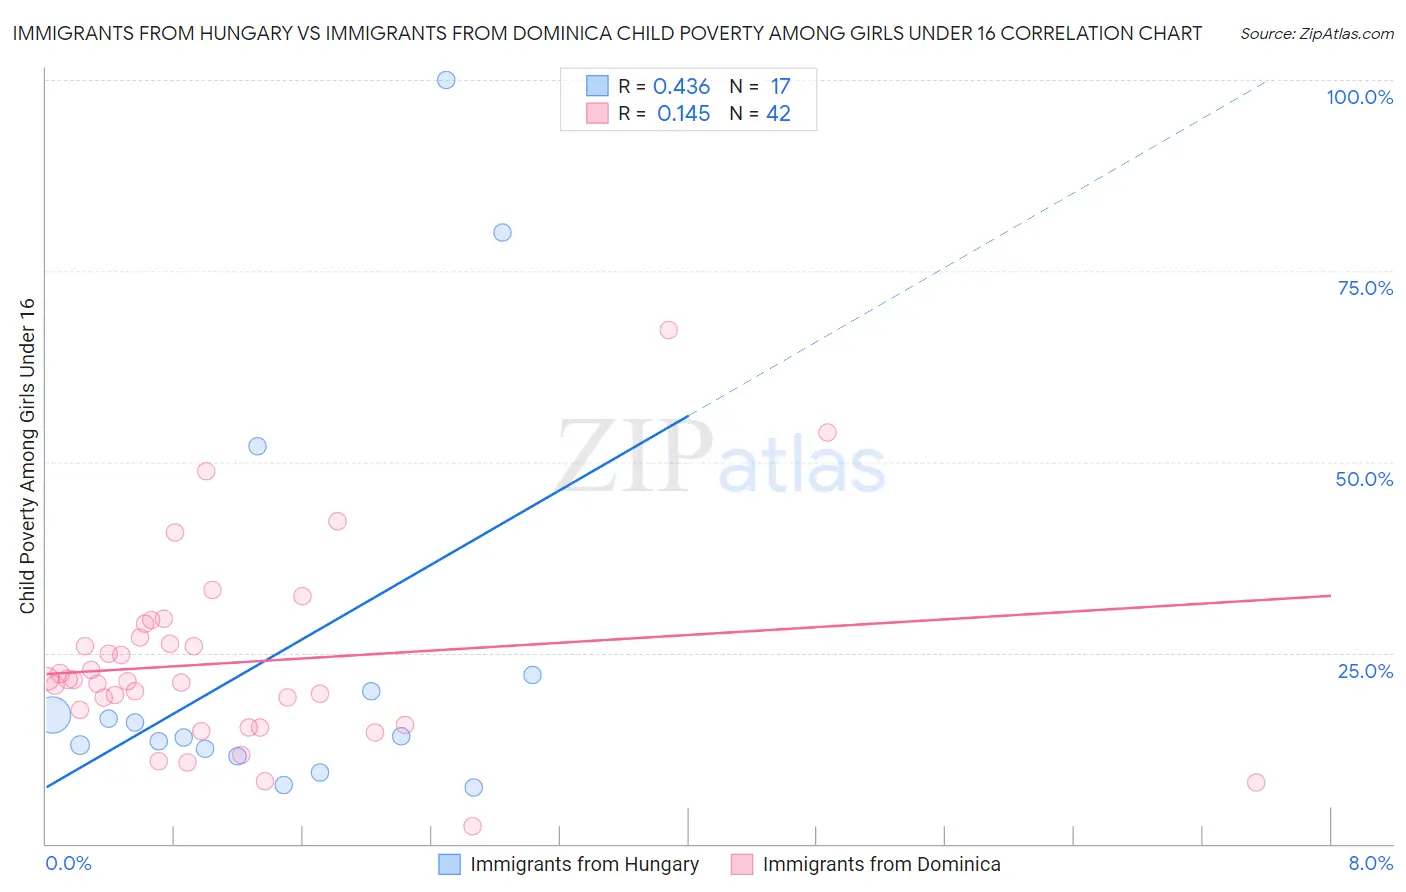 Immigrants from Hungary vs Immigrants from Dominica Child Poverty Among Girls Under 16